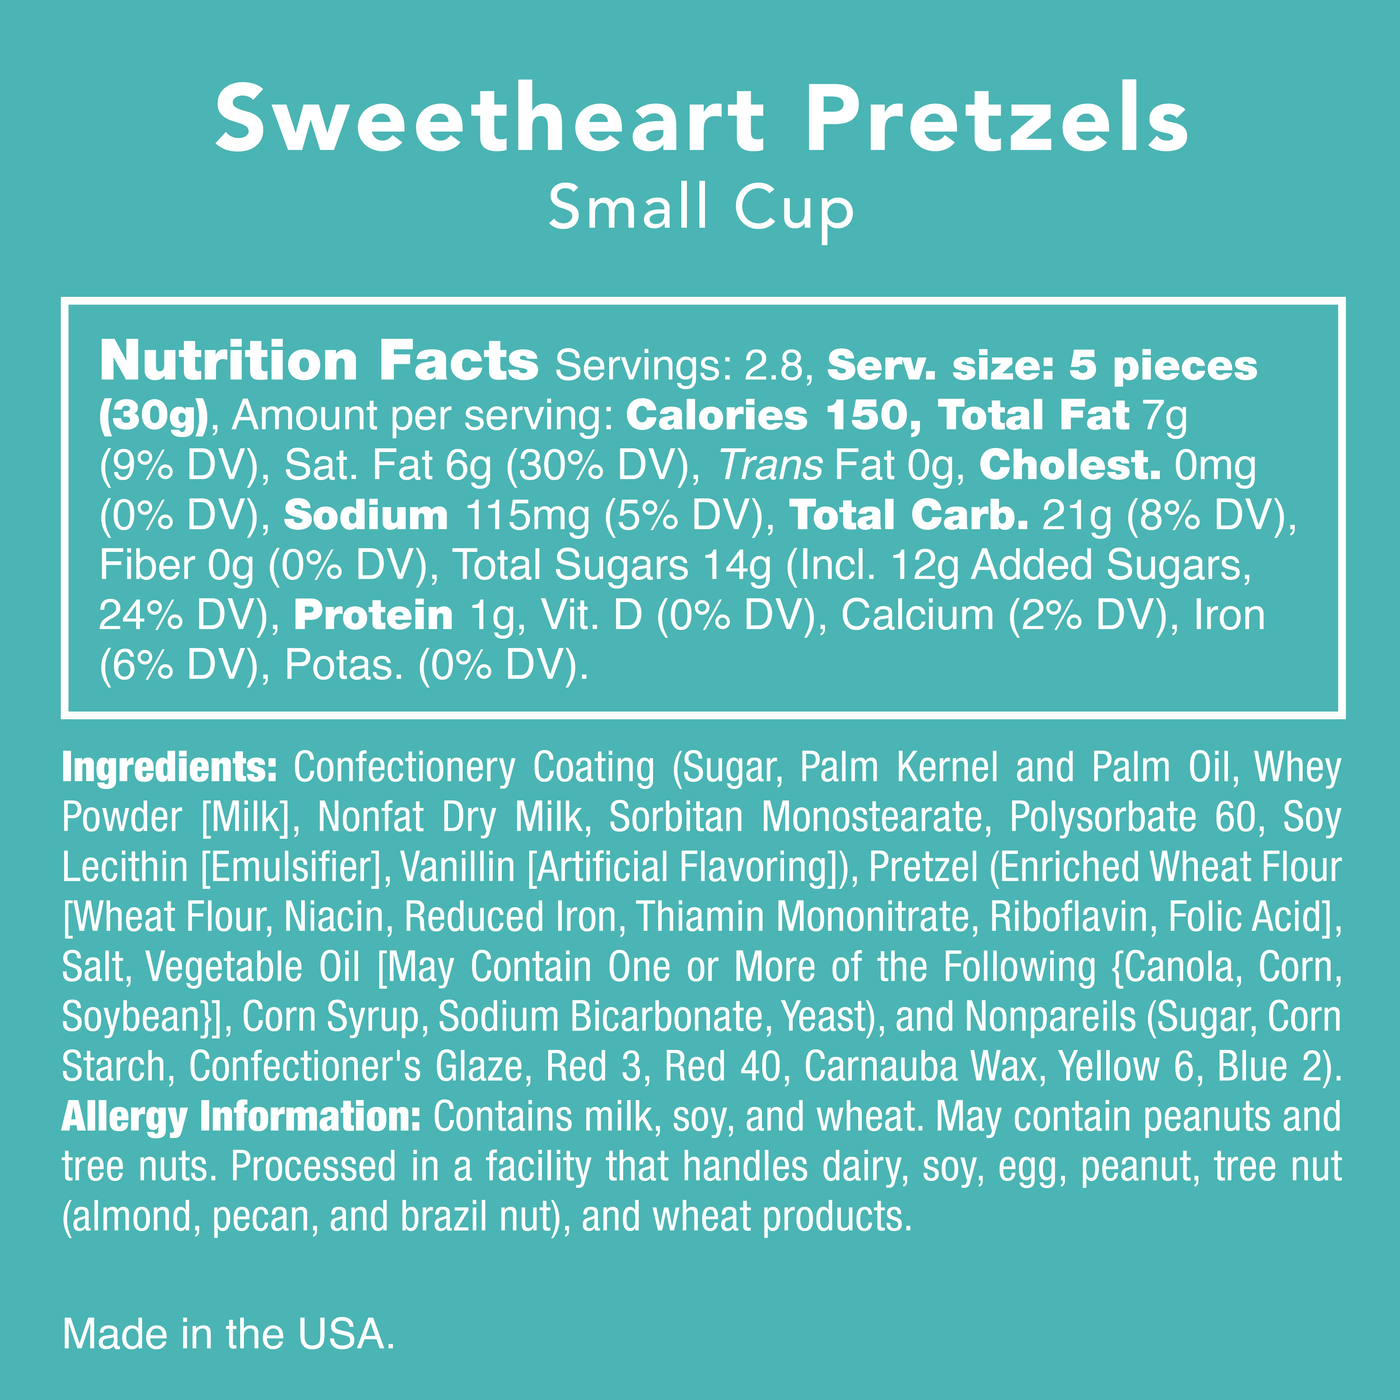 Candy Club Sweetheart Pretzels Small Cup